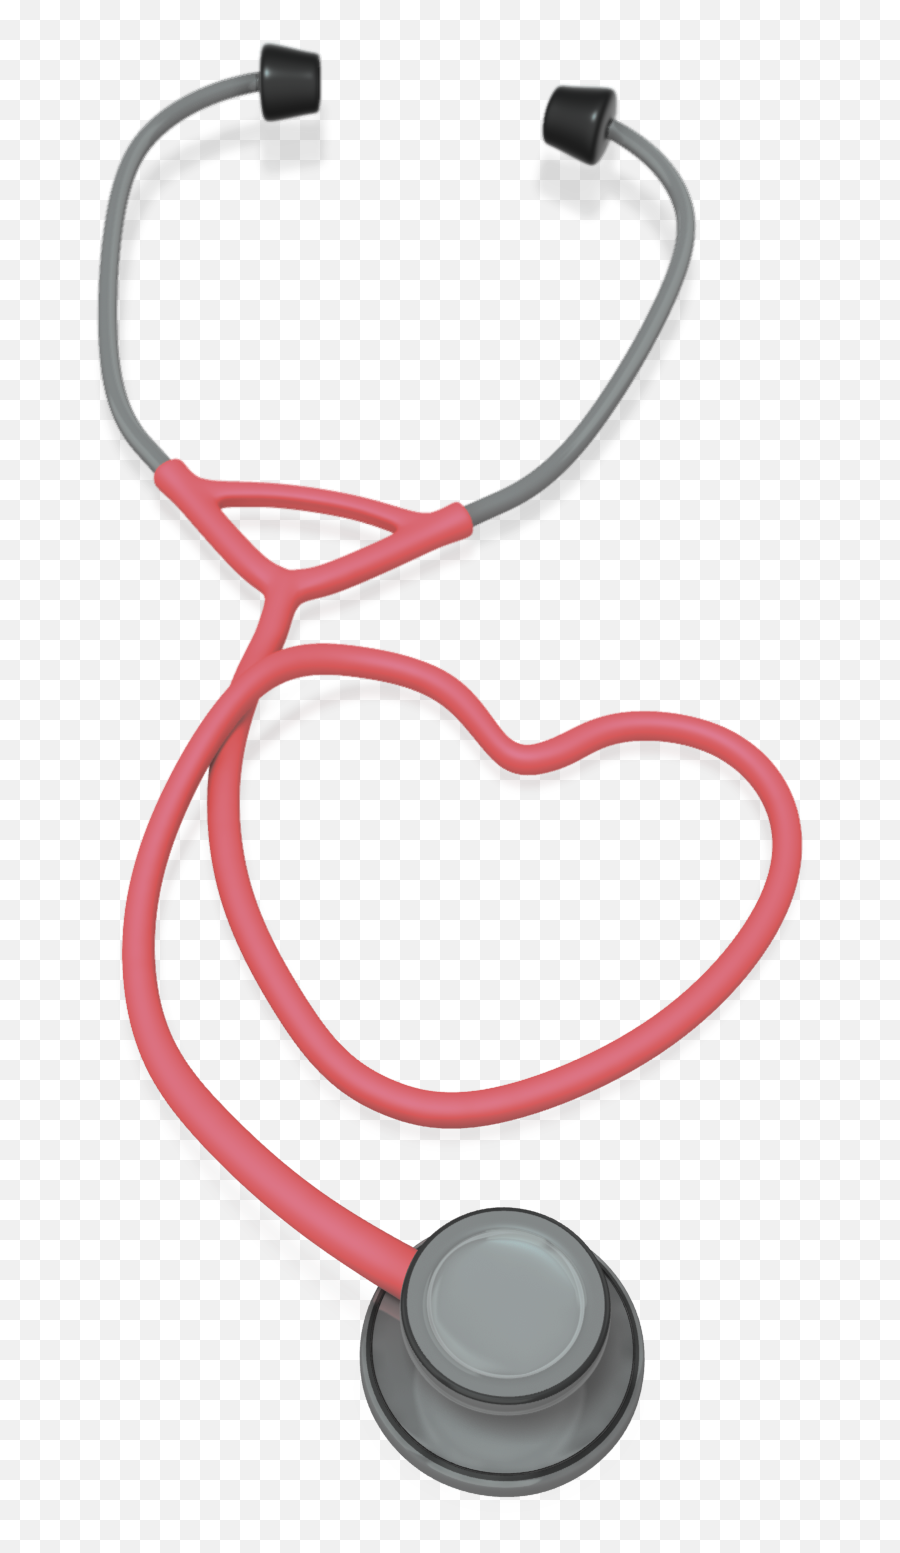 Heart Stethoscope Clipart Image - Stethoscope Image Transparent Background Png,Stethoscope Png